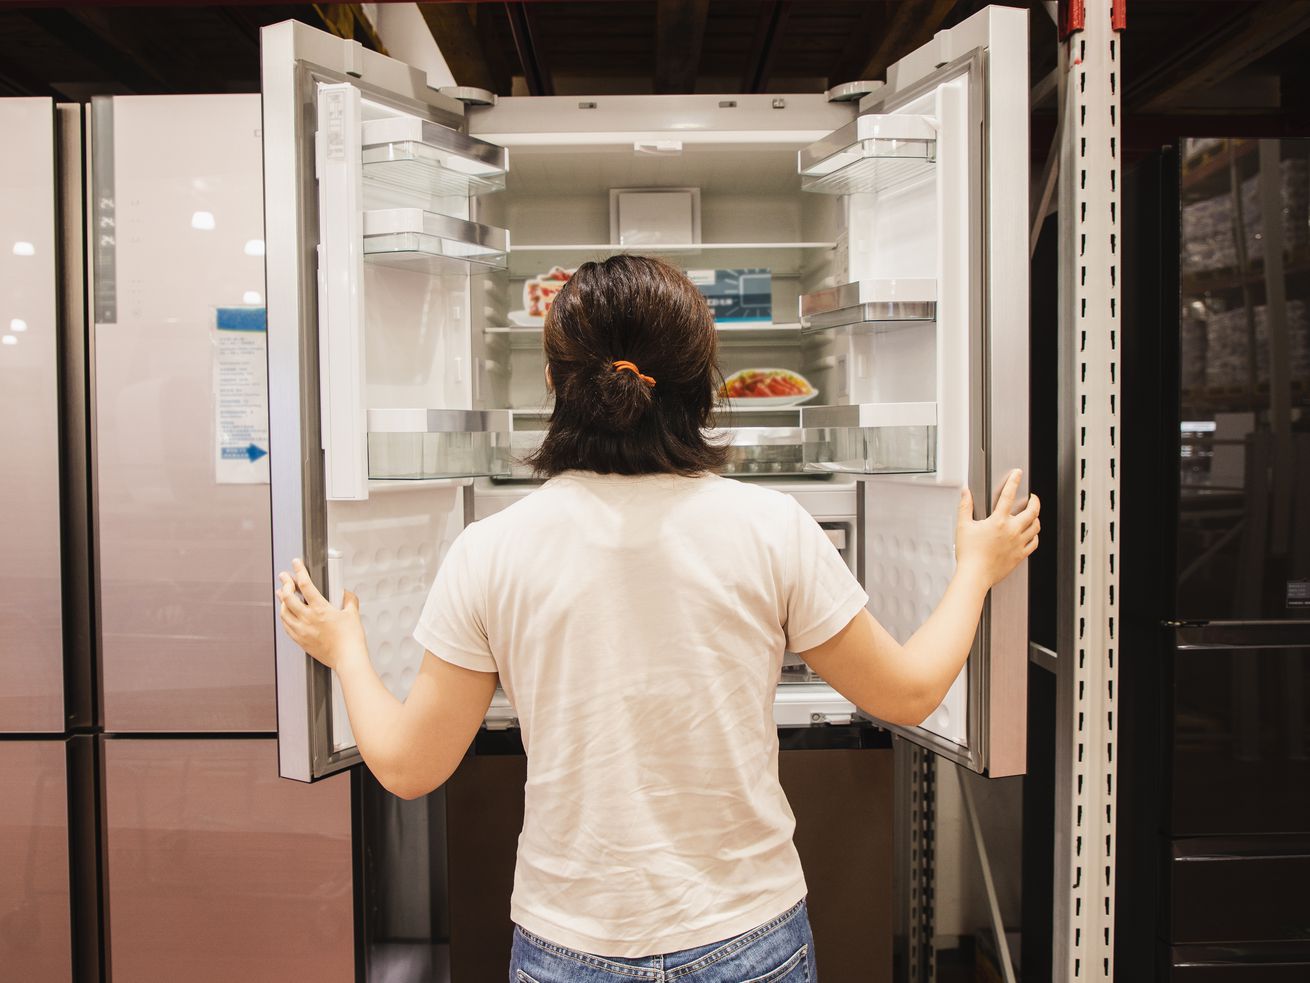 A person opening a refrigerator.